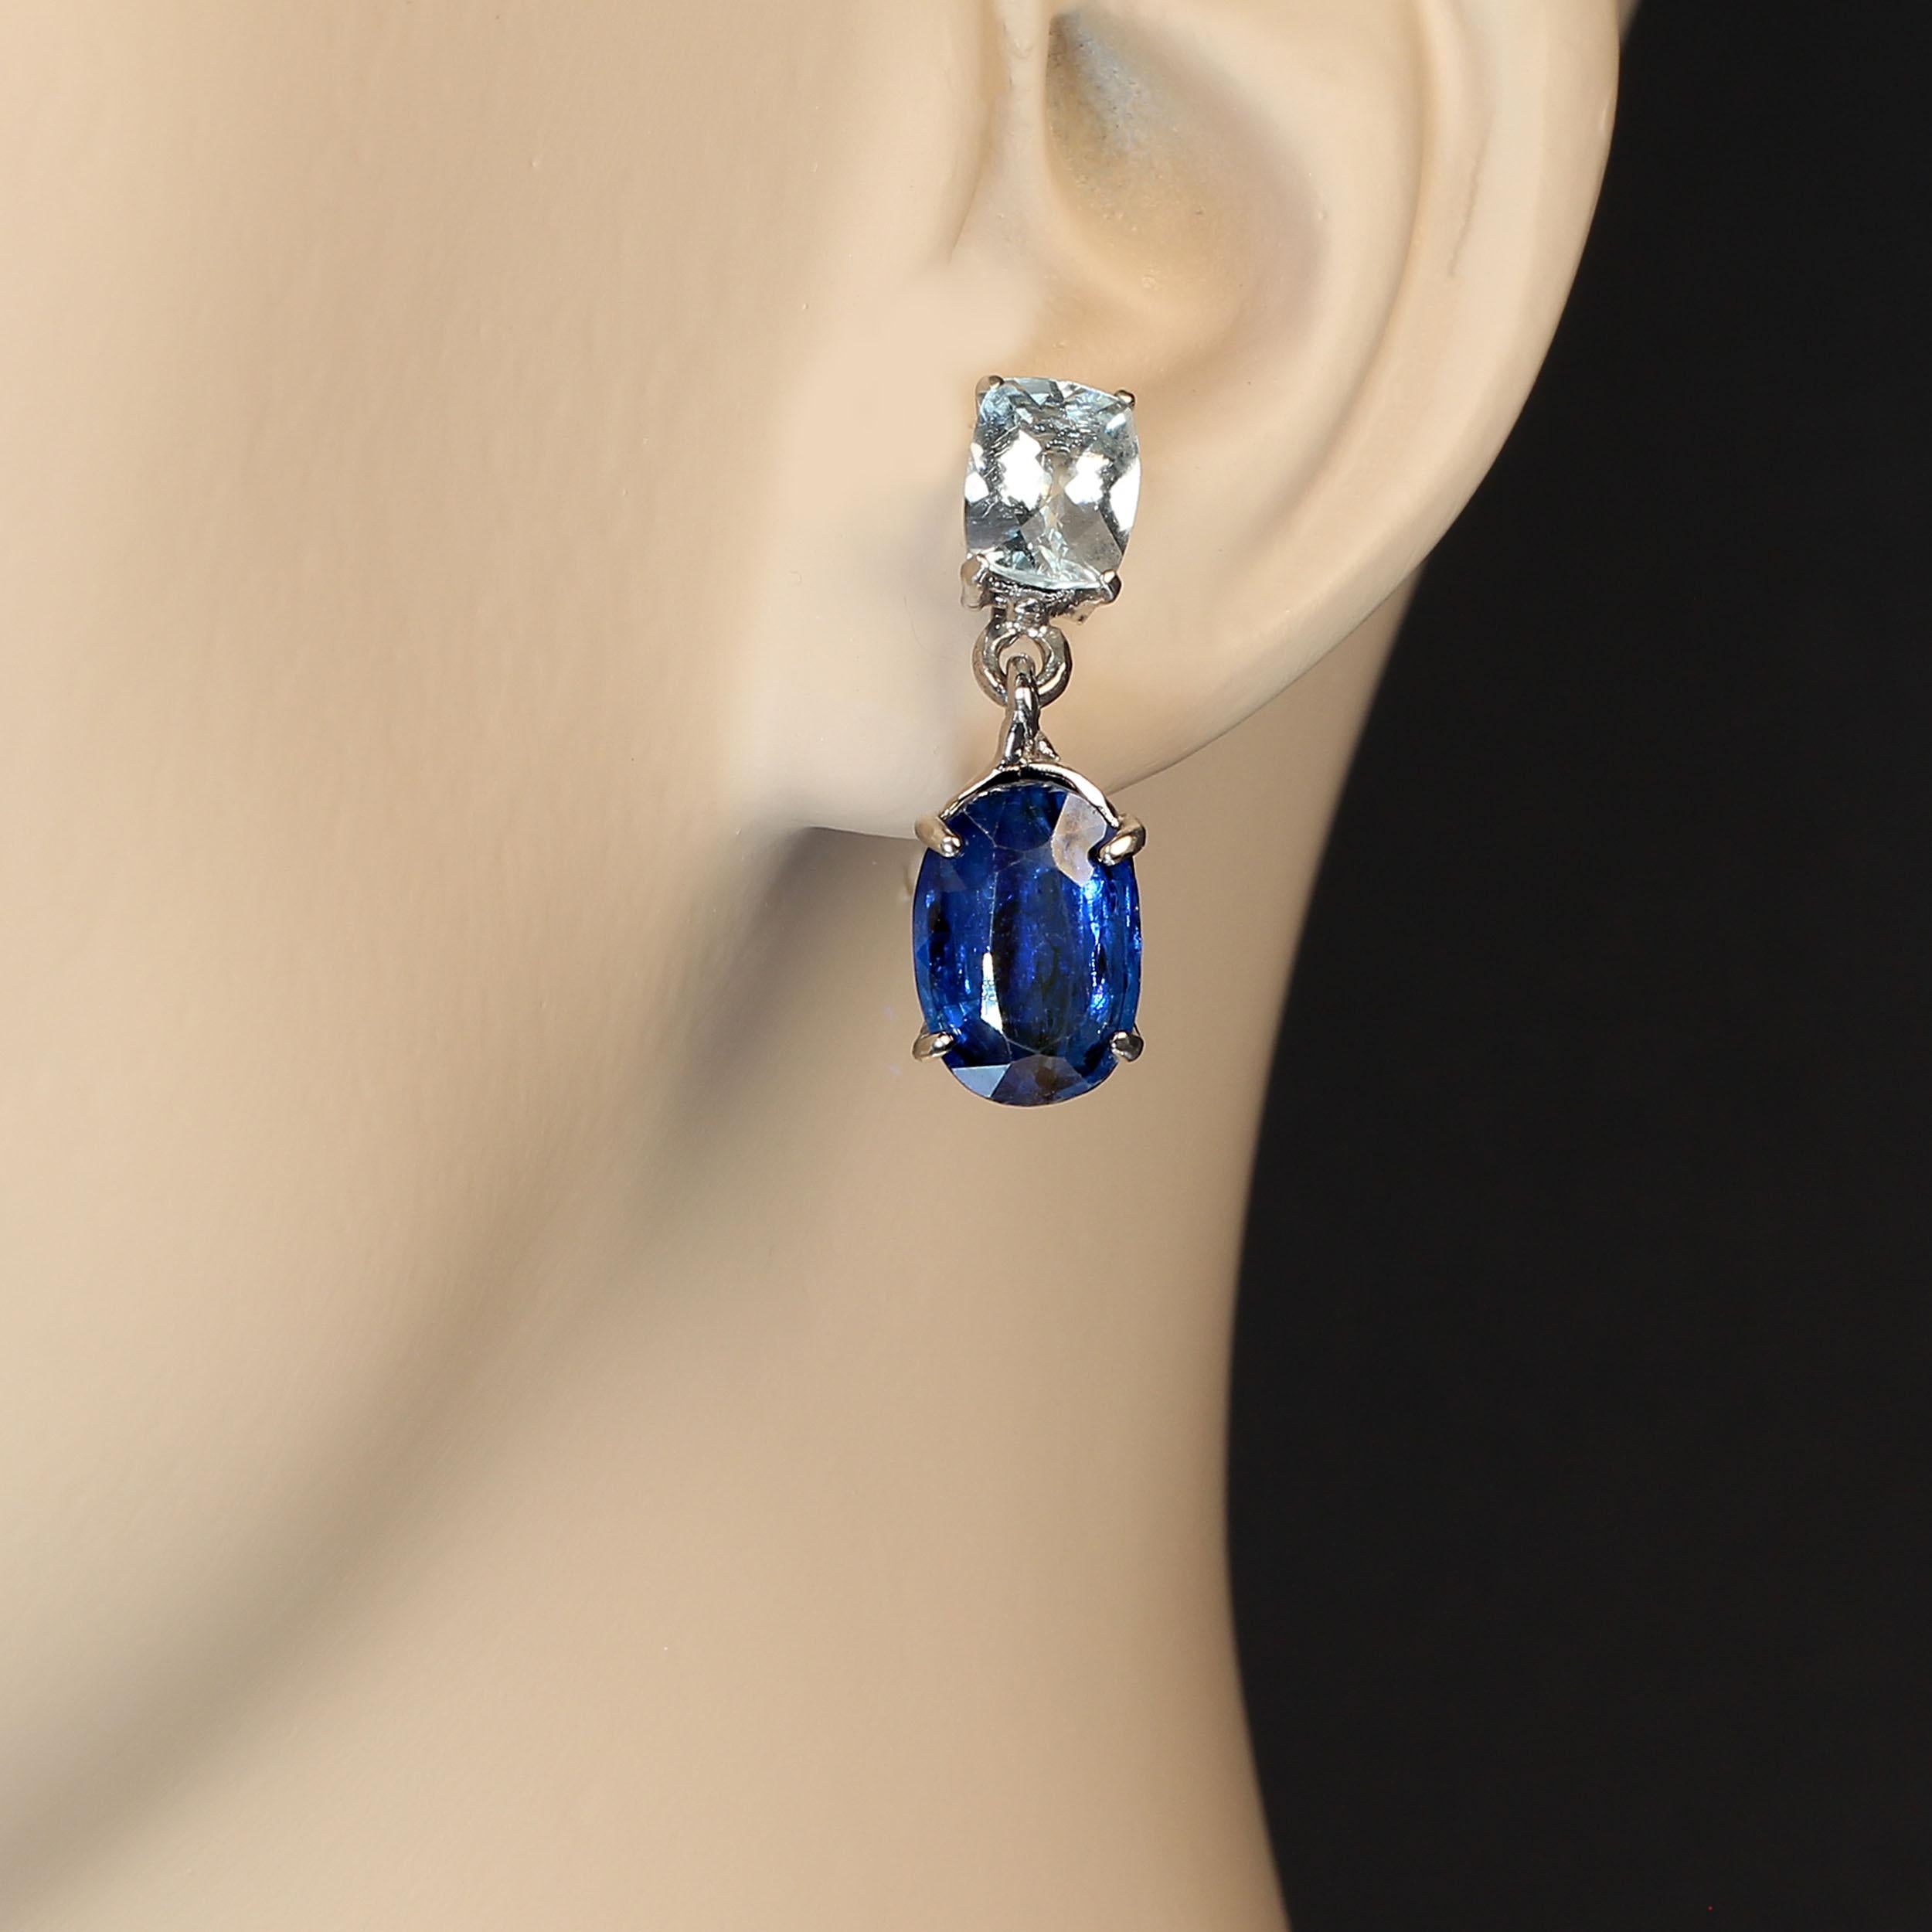 Stunning blue earrings of Aquamarine paired with deeper blue Kyanite.  What's not to love? This gorgeous pair of blue gemstones is set in glowing 14K white gold. The earrings are secured with posts and cushions backs.  They are 15/16 inches in